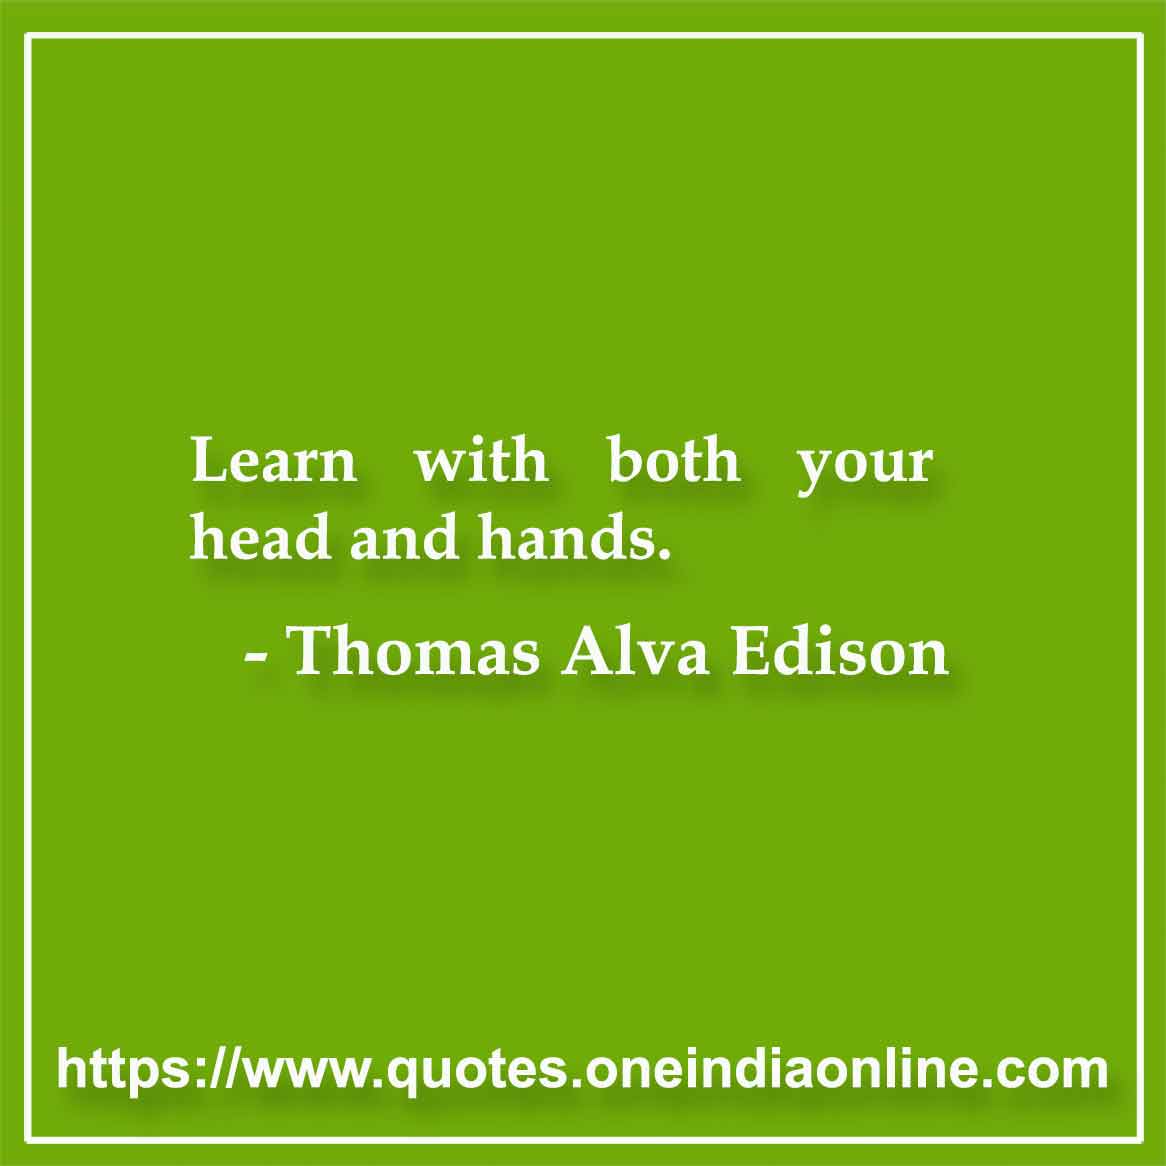 Learn with both your head and hands.

Thomas Edison Sayings